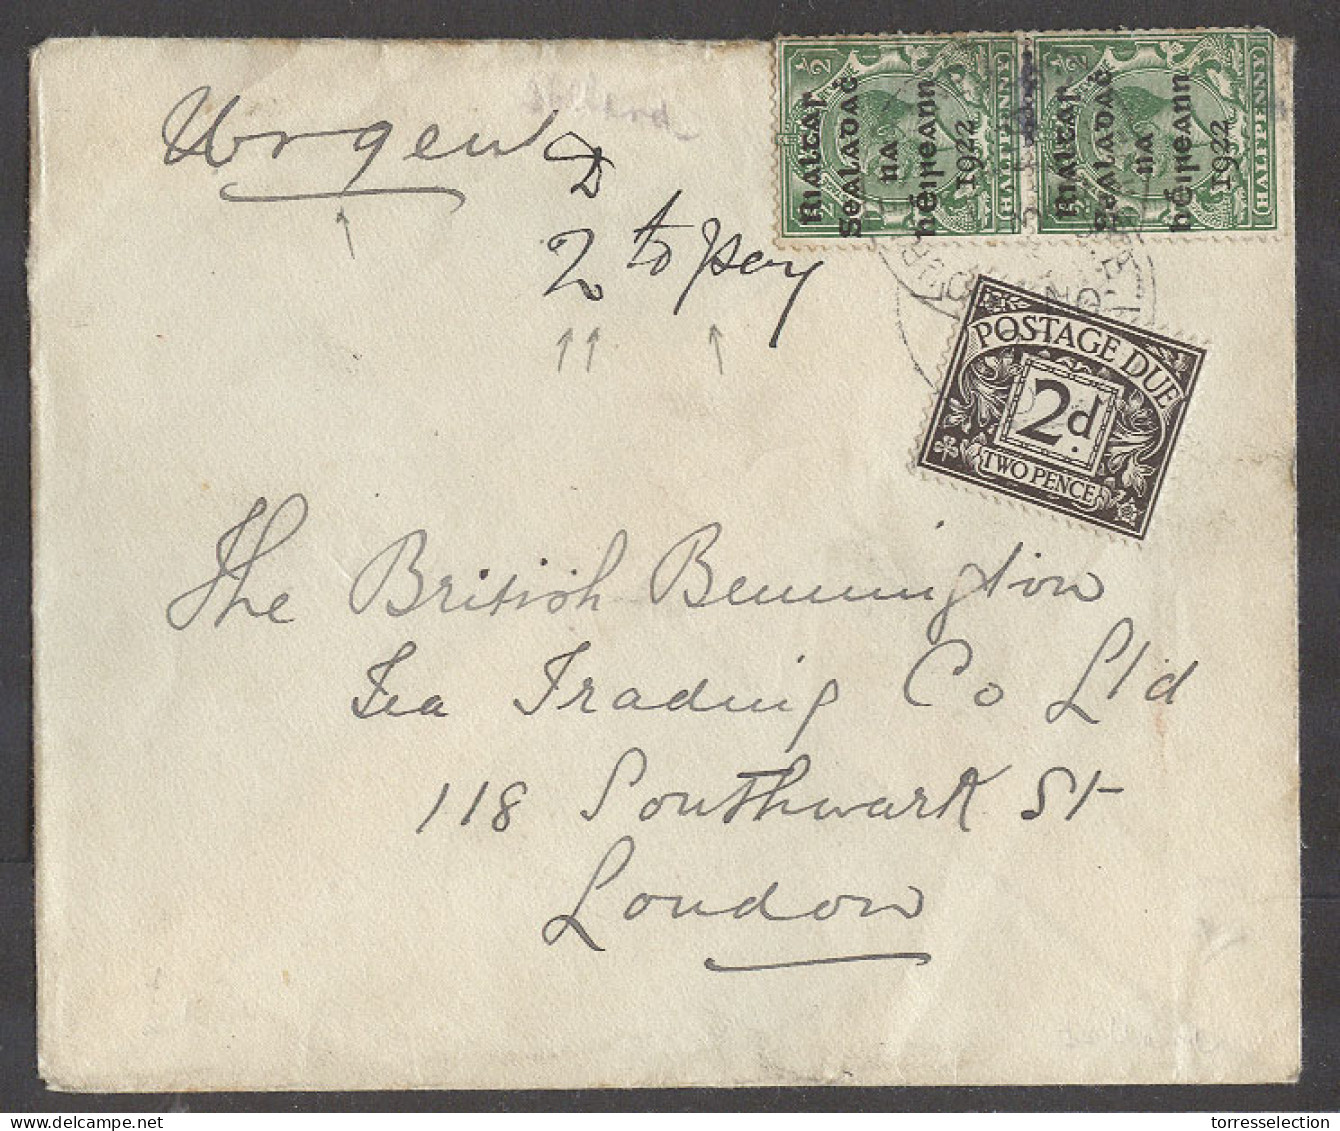 EIRE. 1922 (Oct). Fkd Env To London, UK With 1/2d Green Vert Pair Ovptd Issue Urgent Manuscript 2 To Pay GB 2d Tied Post - Used Stamps